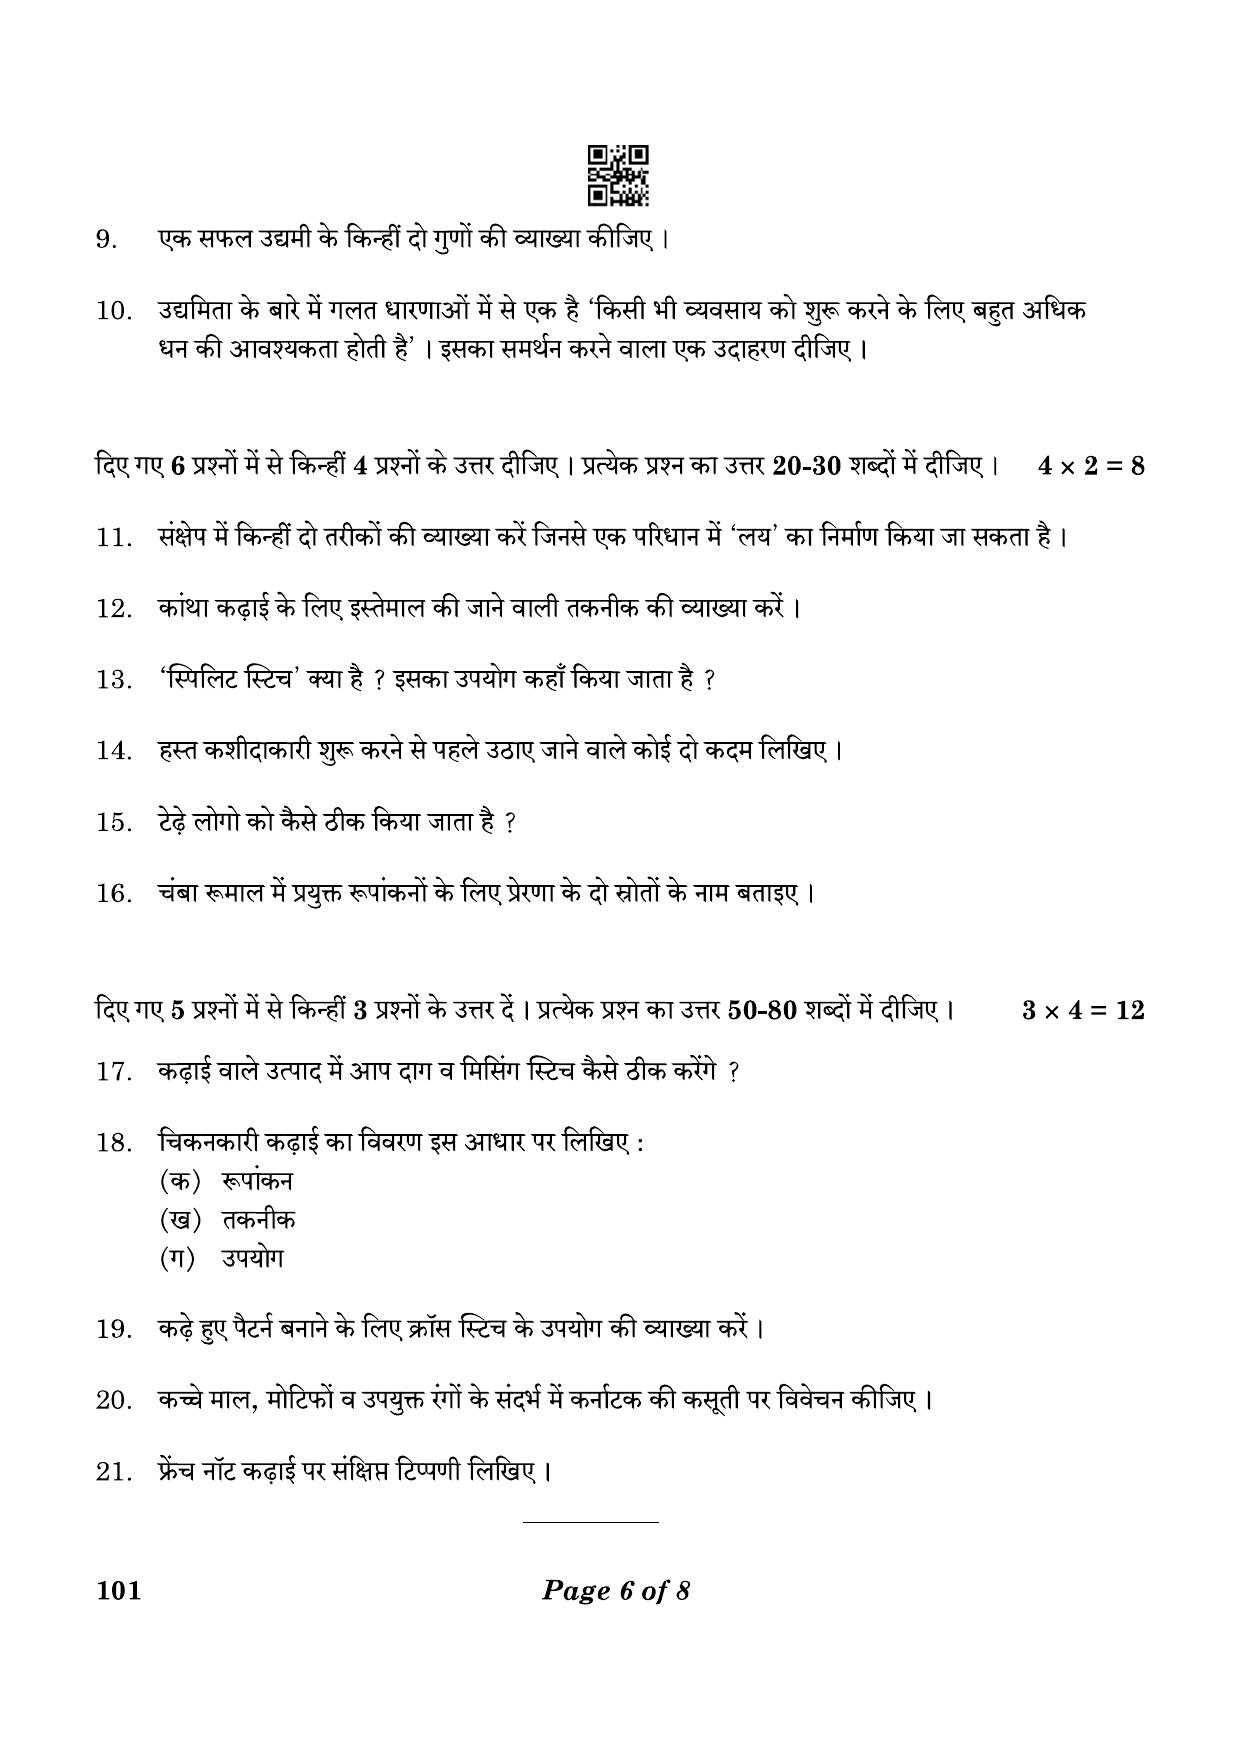 CBSE Class 10 101 Apparel 2023 Question Paper - Page 6